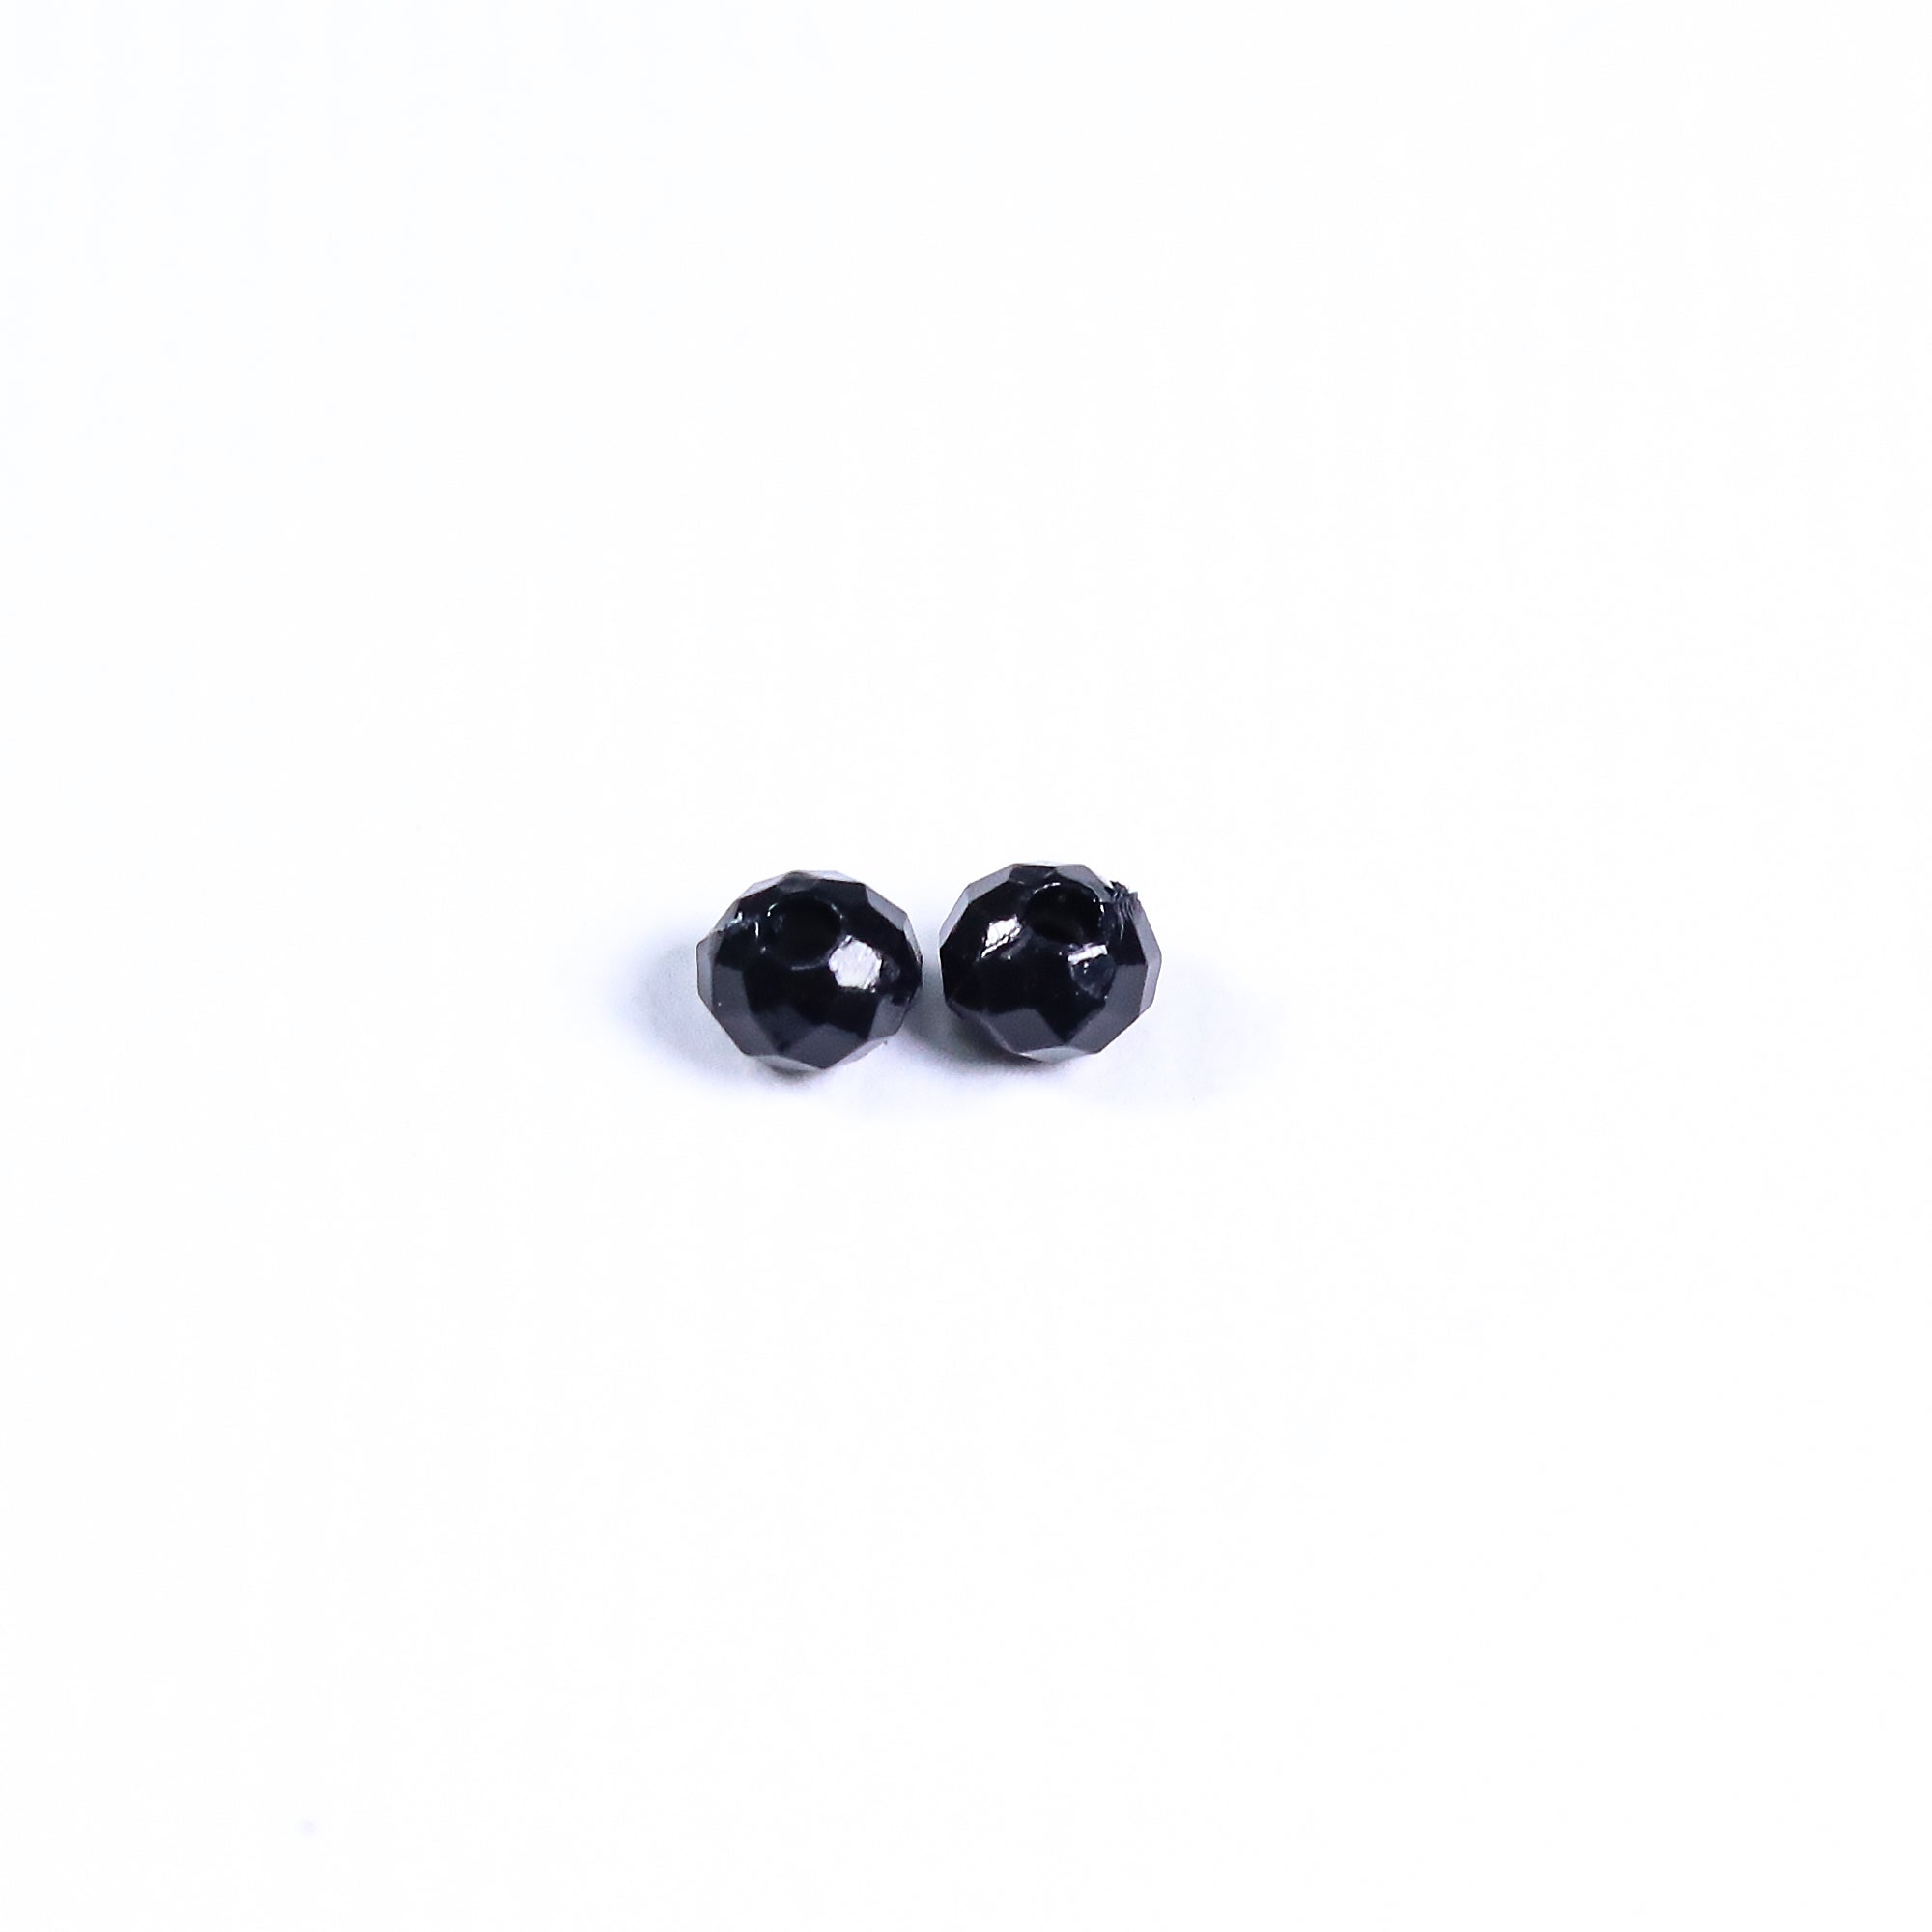 Beads Glossy Black Faceted Seed 4Mm X 3Mm 30G Pb Ib